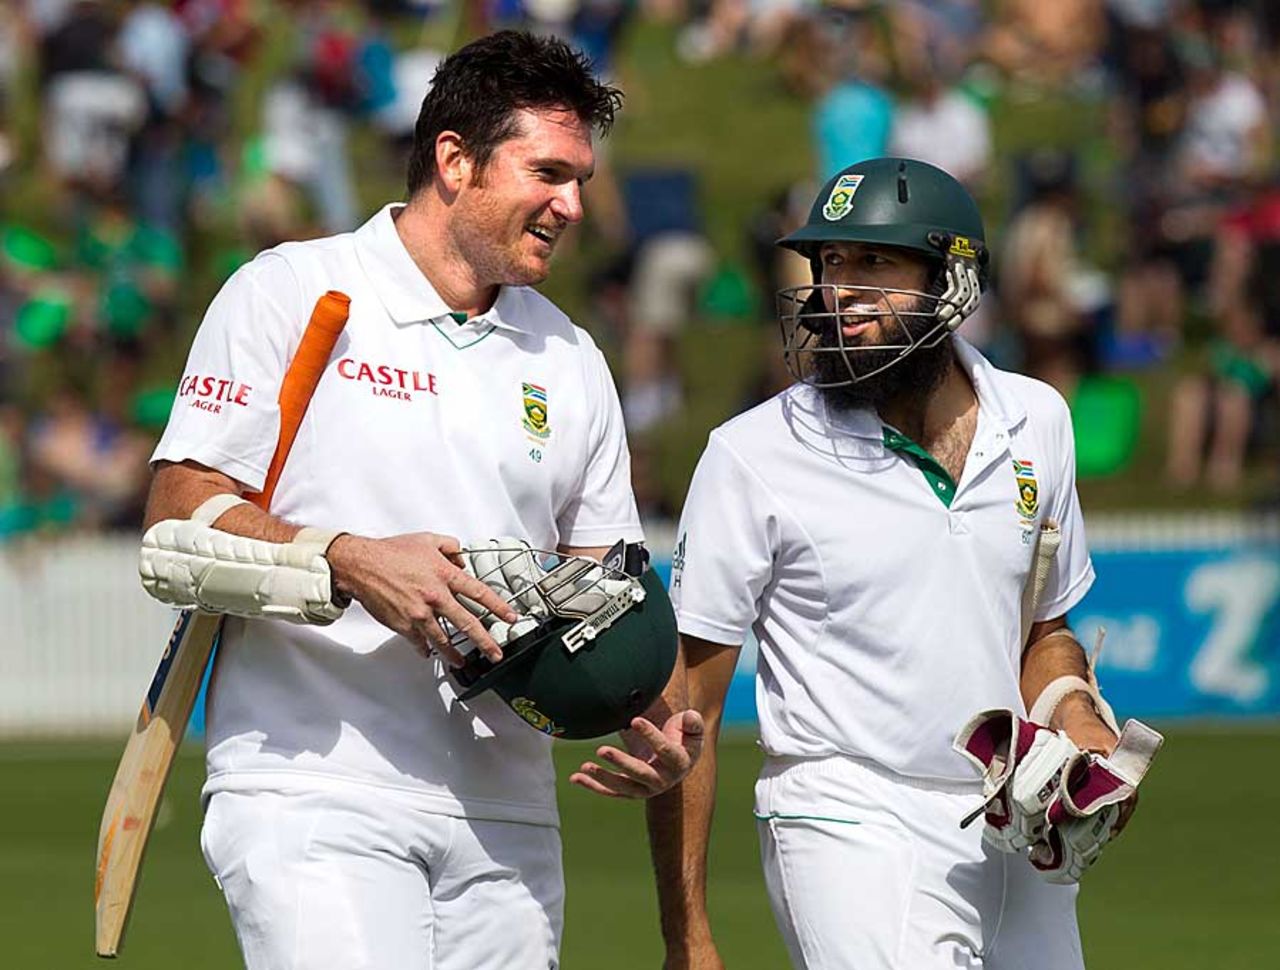 Graeme Smith walks back with Hashim Amla after taking his team to a win, New Zealand v South Africa, 2nd Test, Hamilton, 3rd day, March 17, 2012